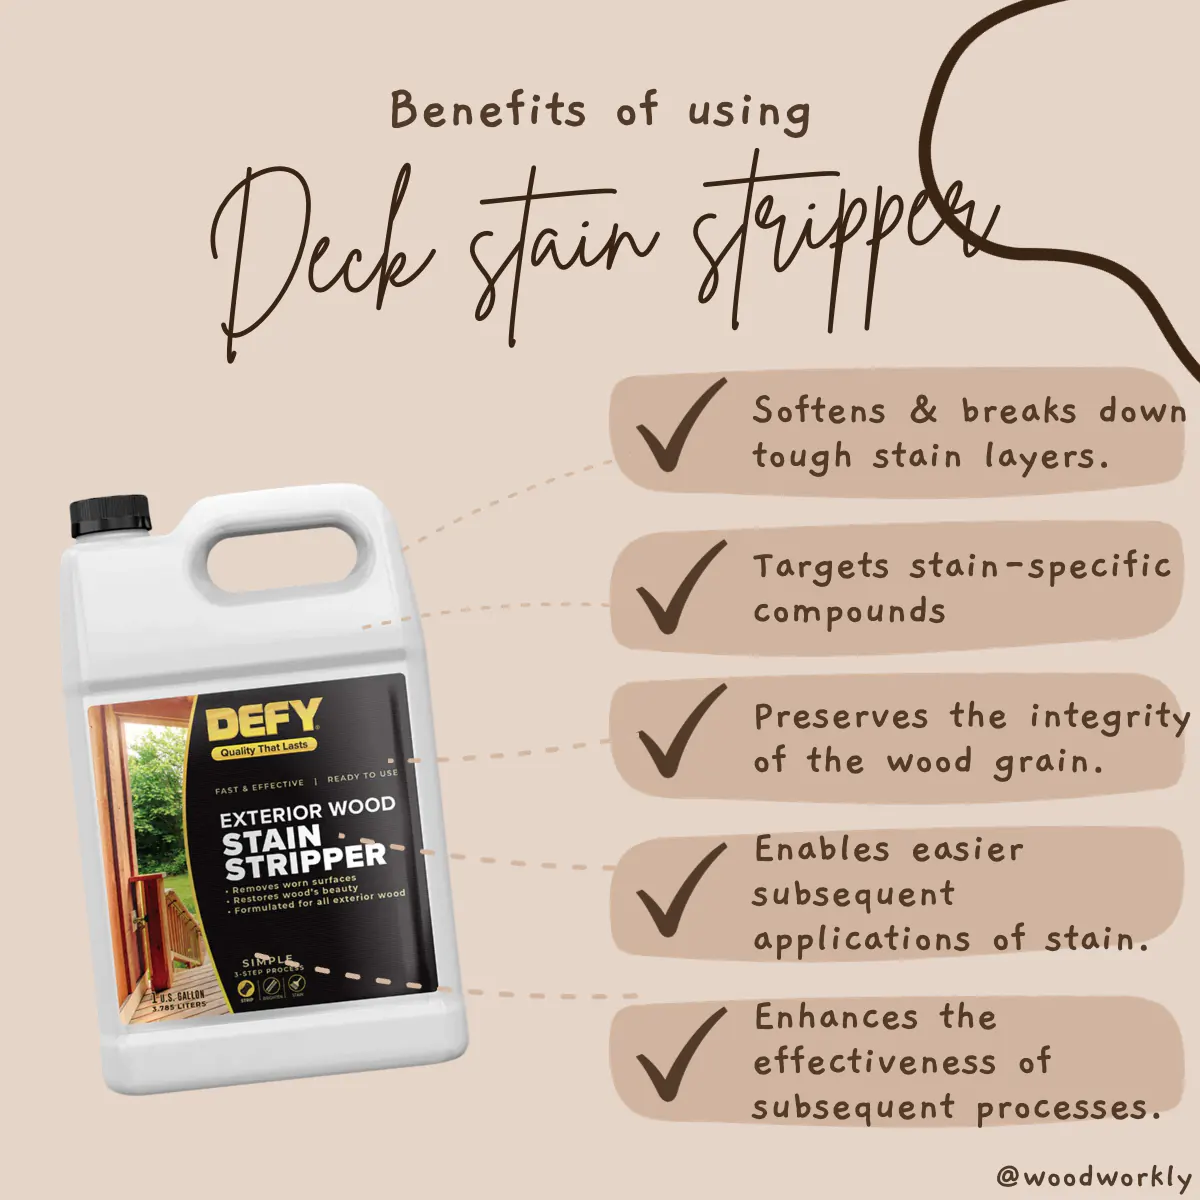 Benefits of using deck stain stripper to remove solid stains on wood deck